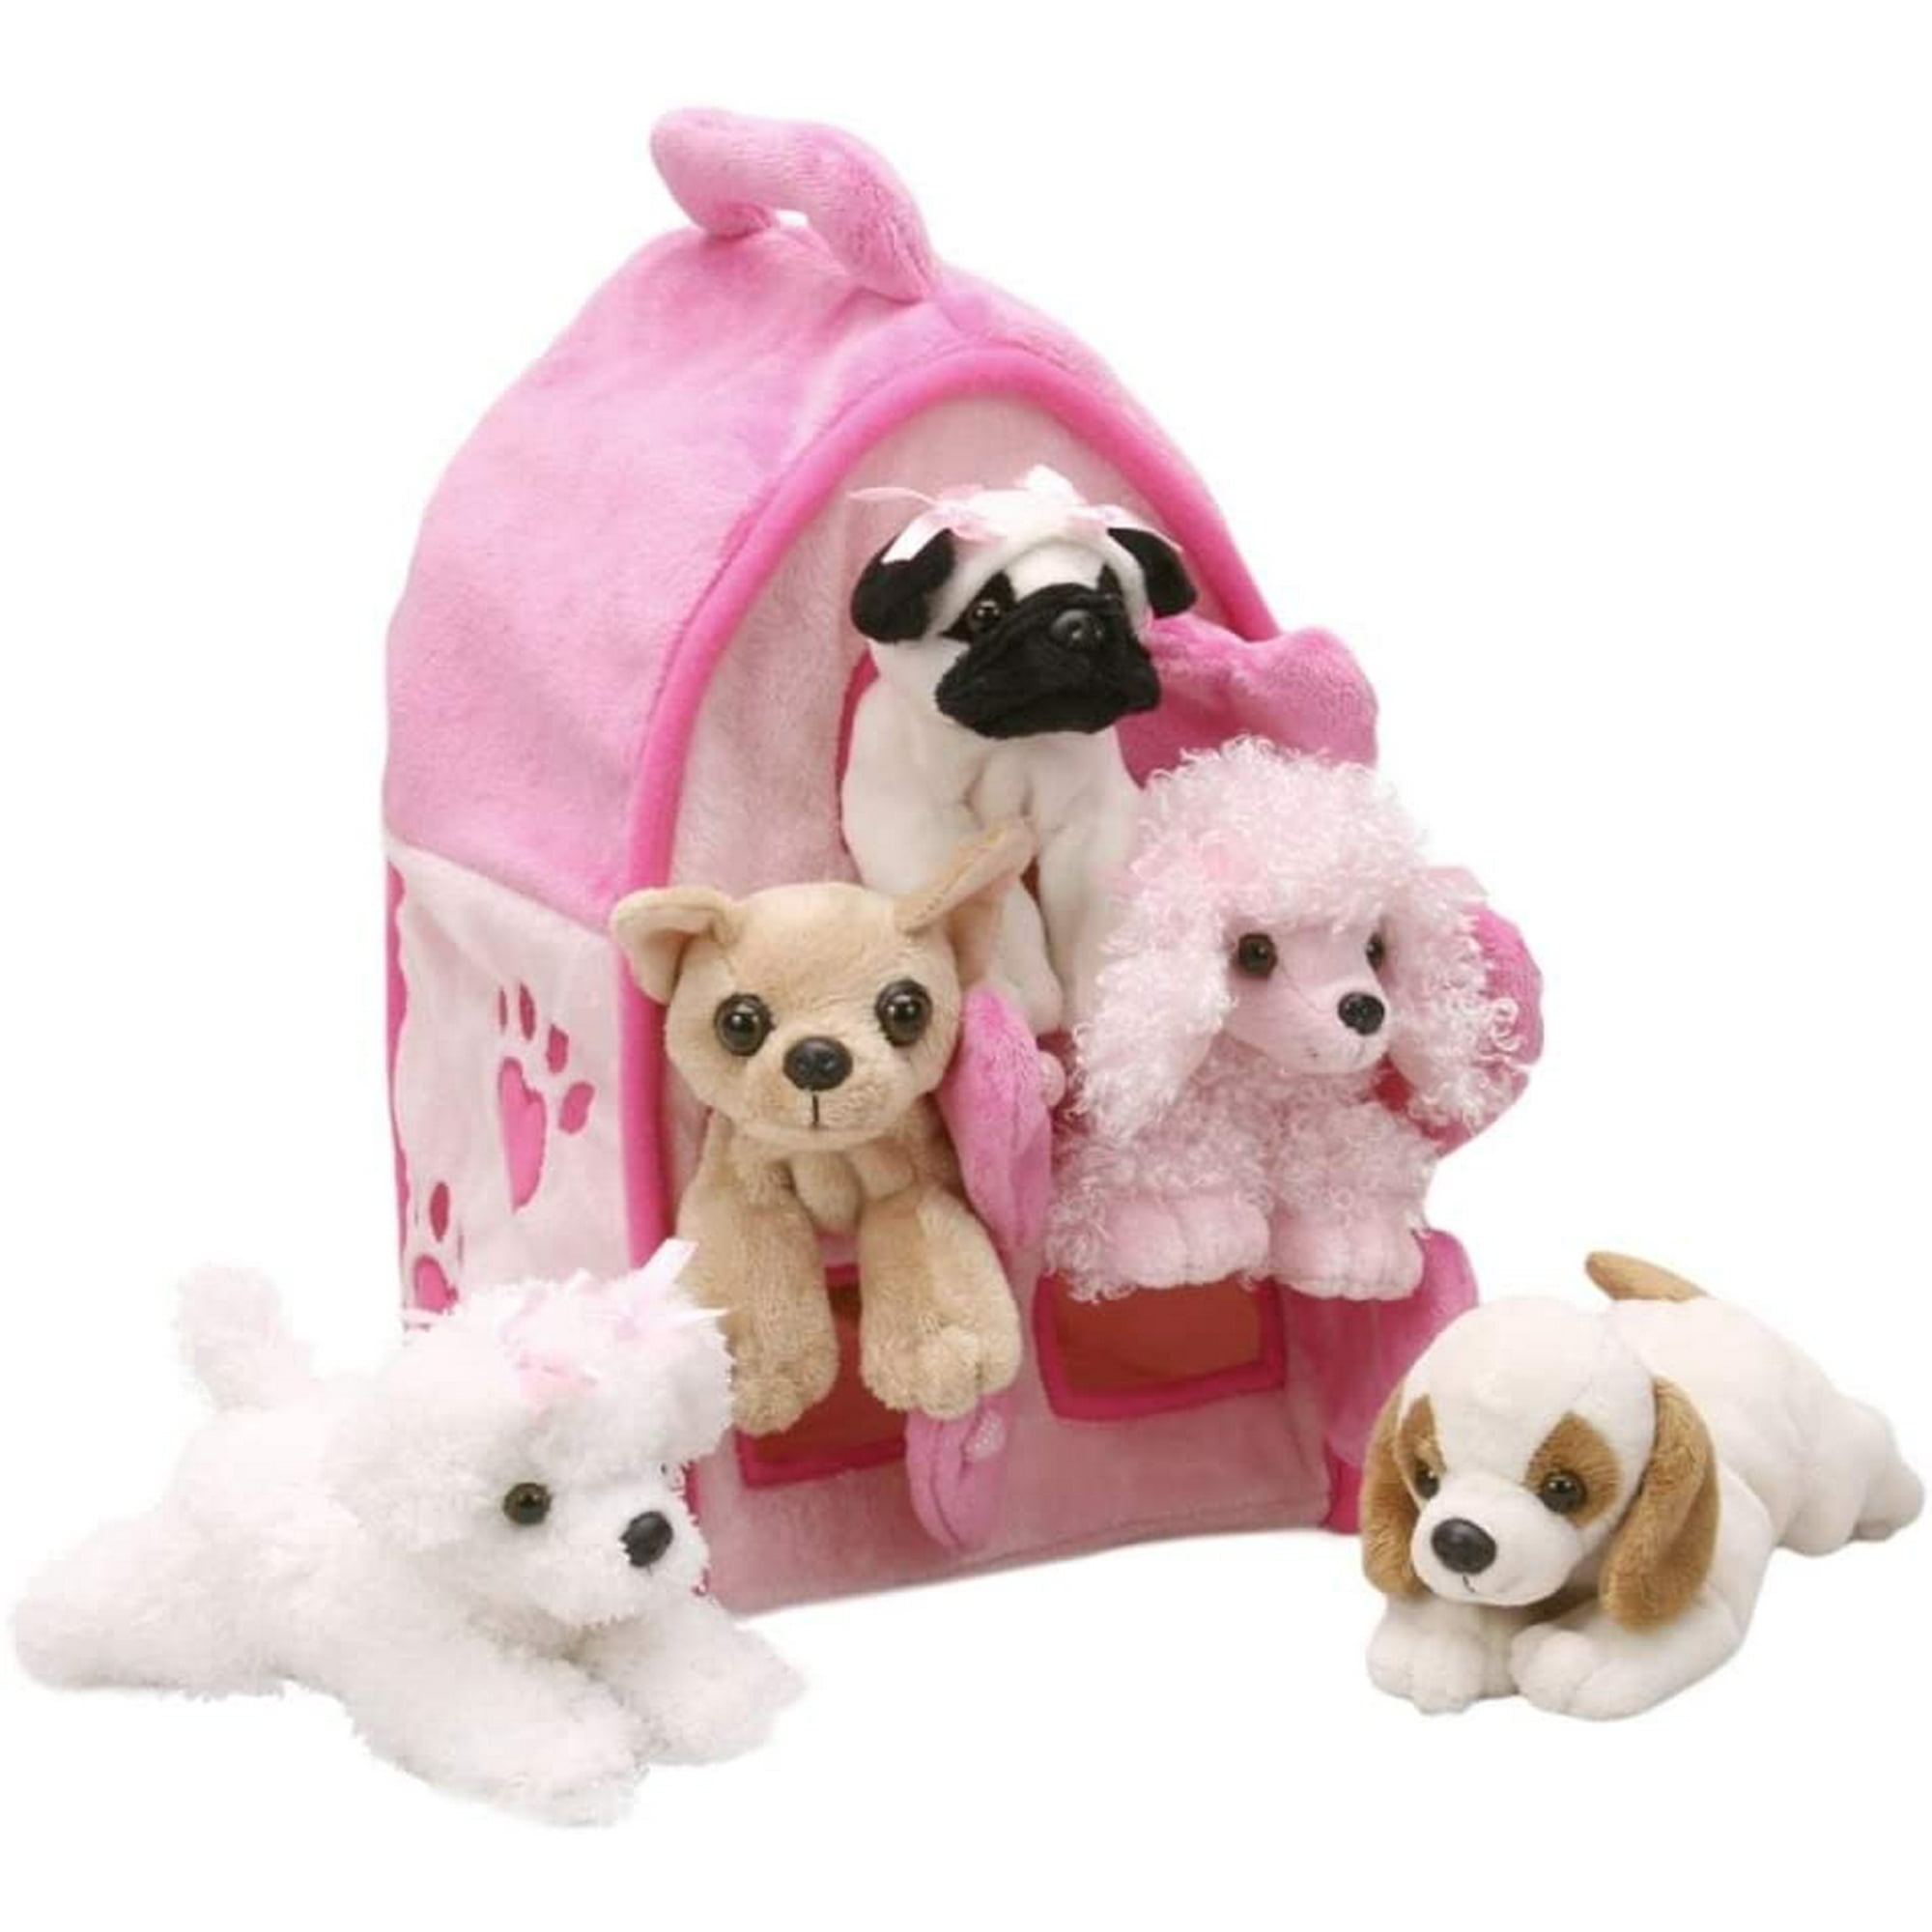 Plush Pink Dog House with Dogs - Five (5) Stuffed Animal Dogs in Pink Play  Dog House Case | Walmart Canada